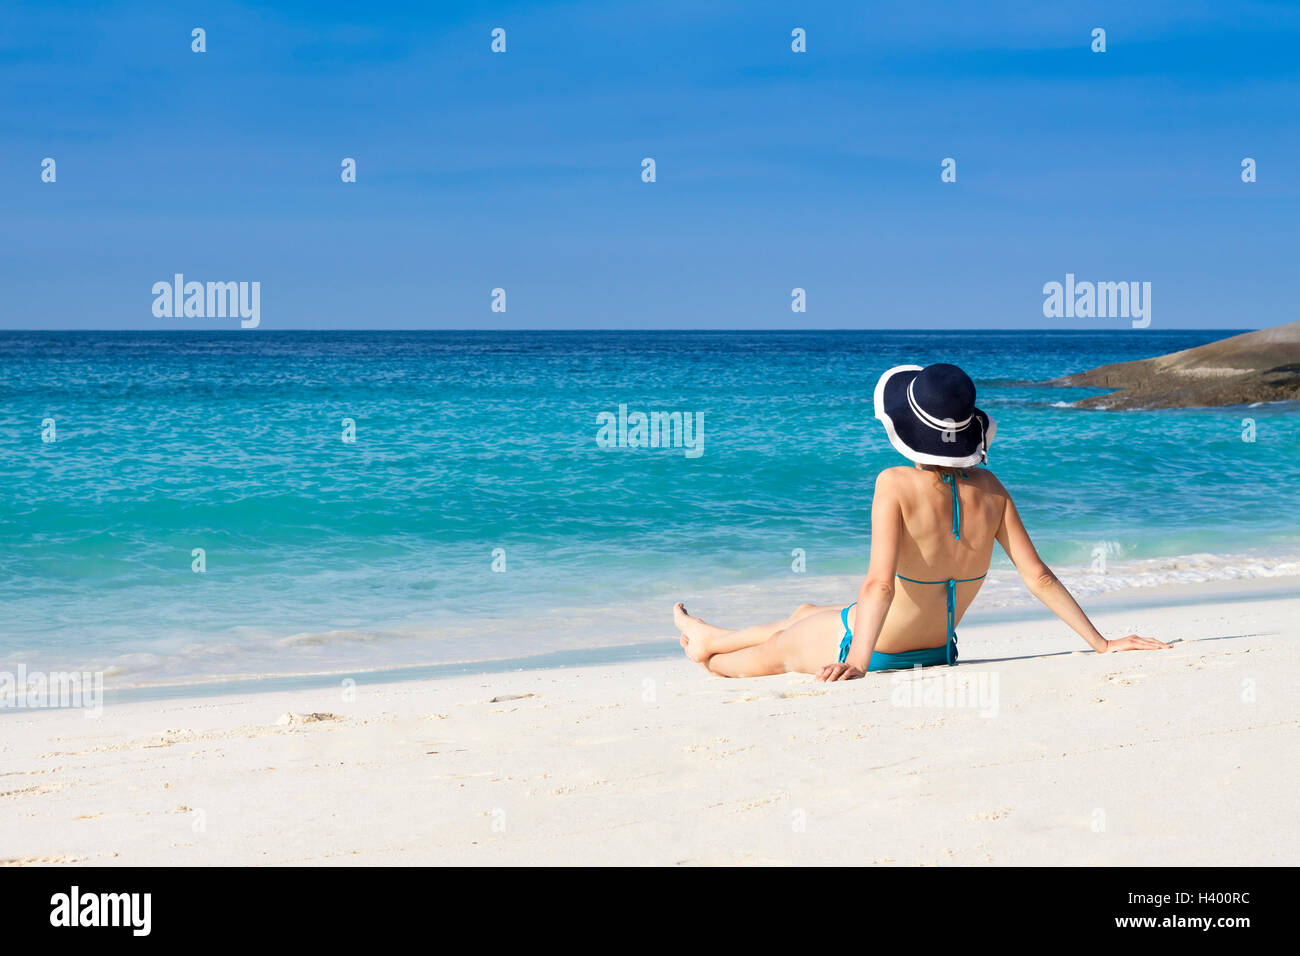 Woman relaxing on paradise island beach with white sand and blue sea Stock Photo